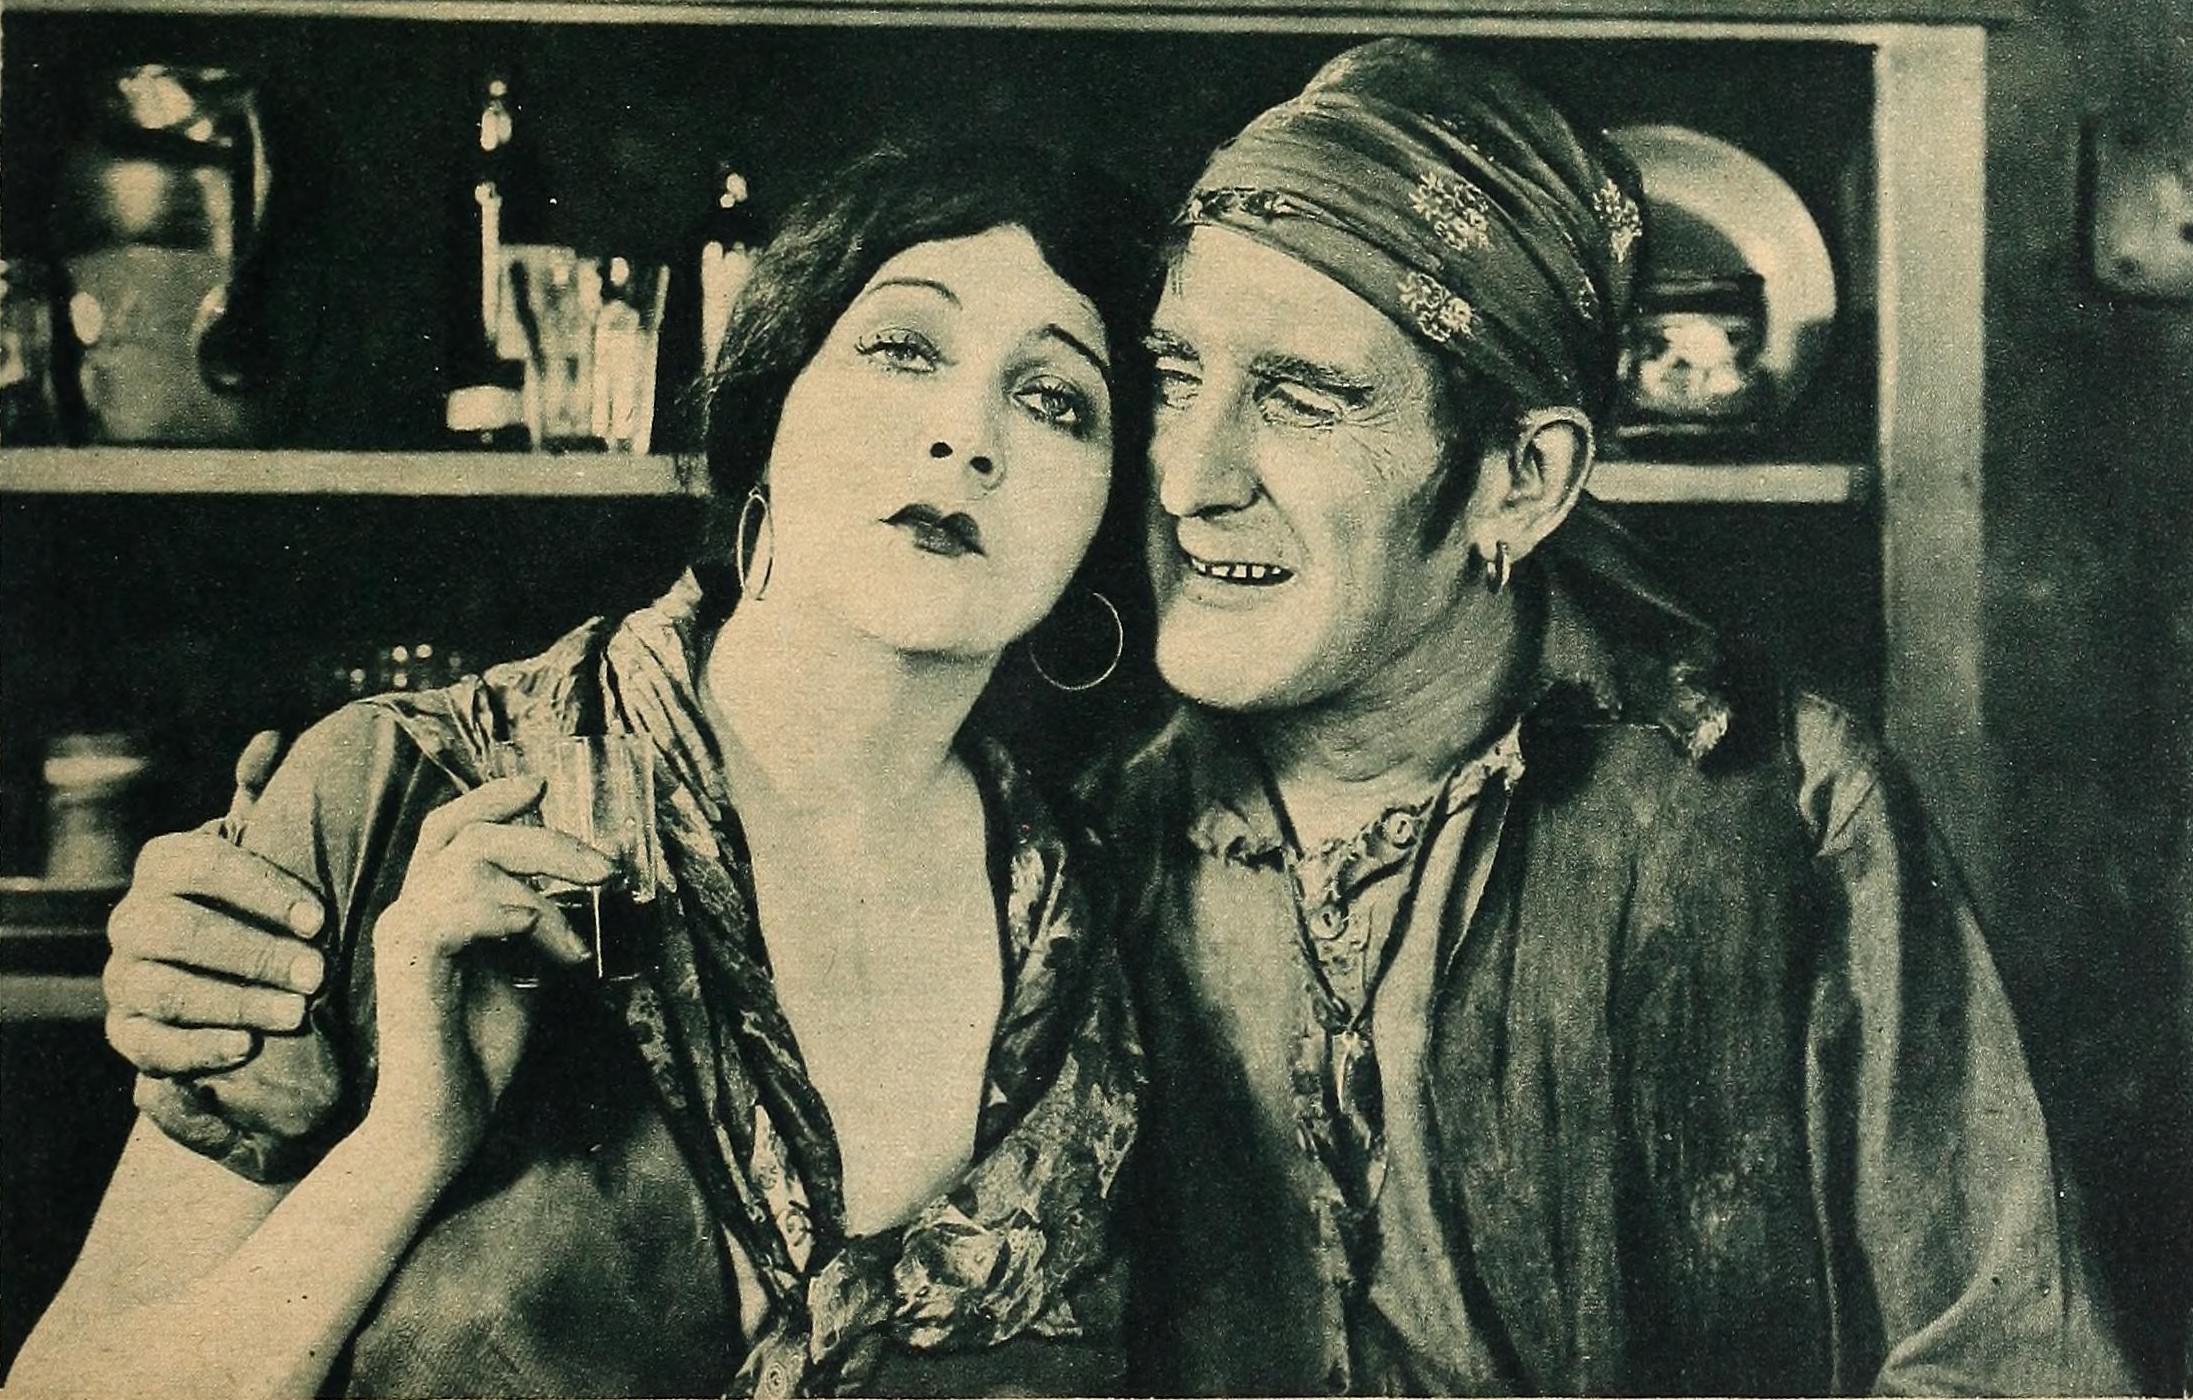 Barbara La Marr and William V. Mong in "Thy Name is Woman", 1924